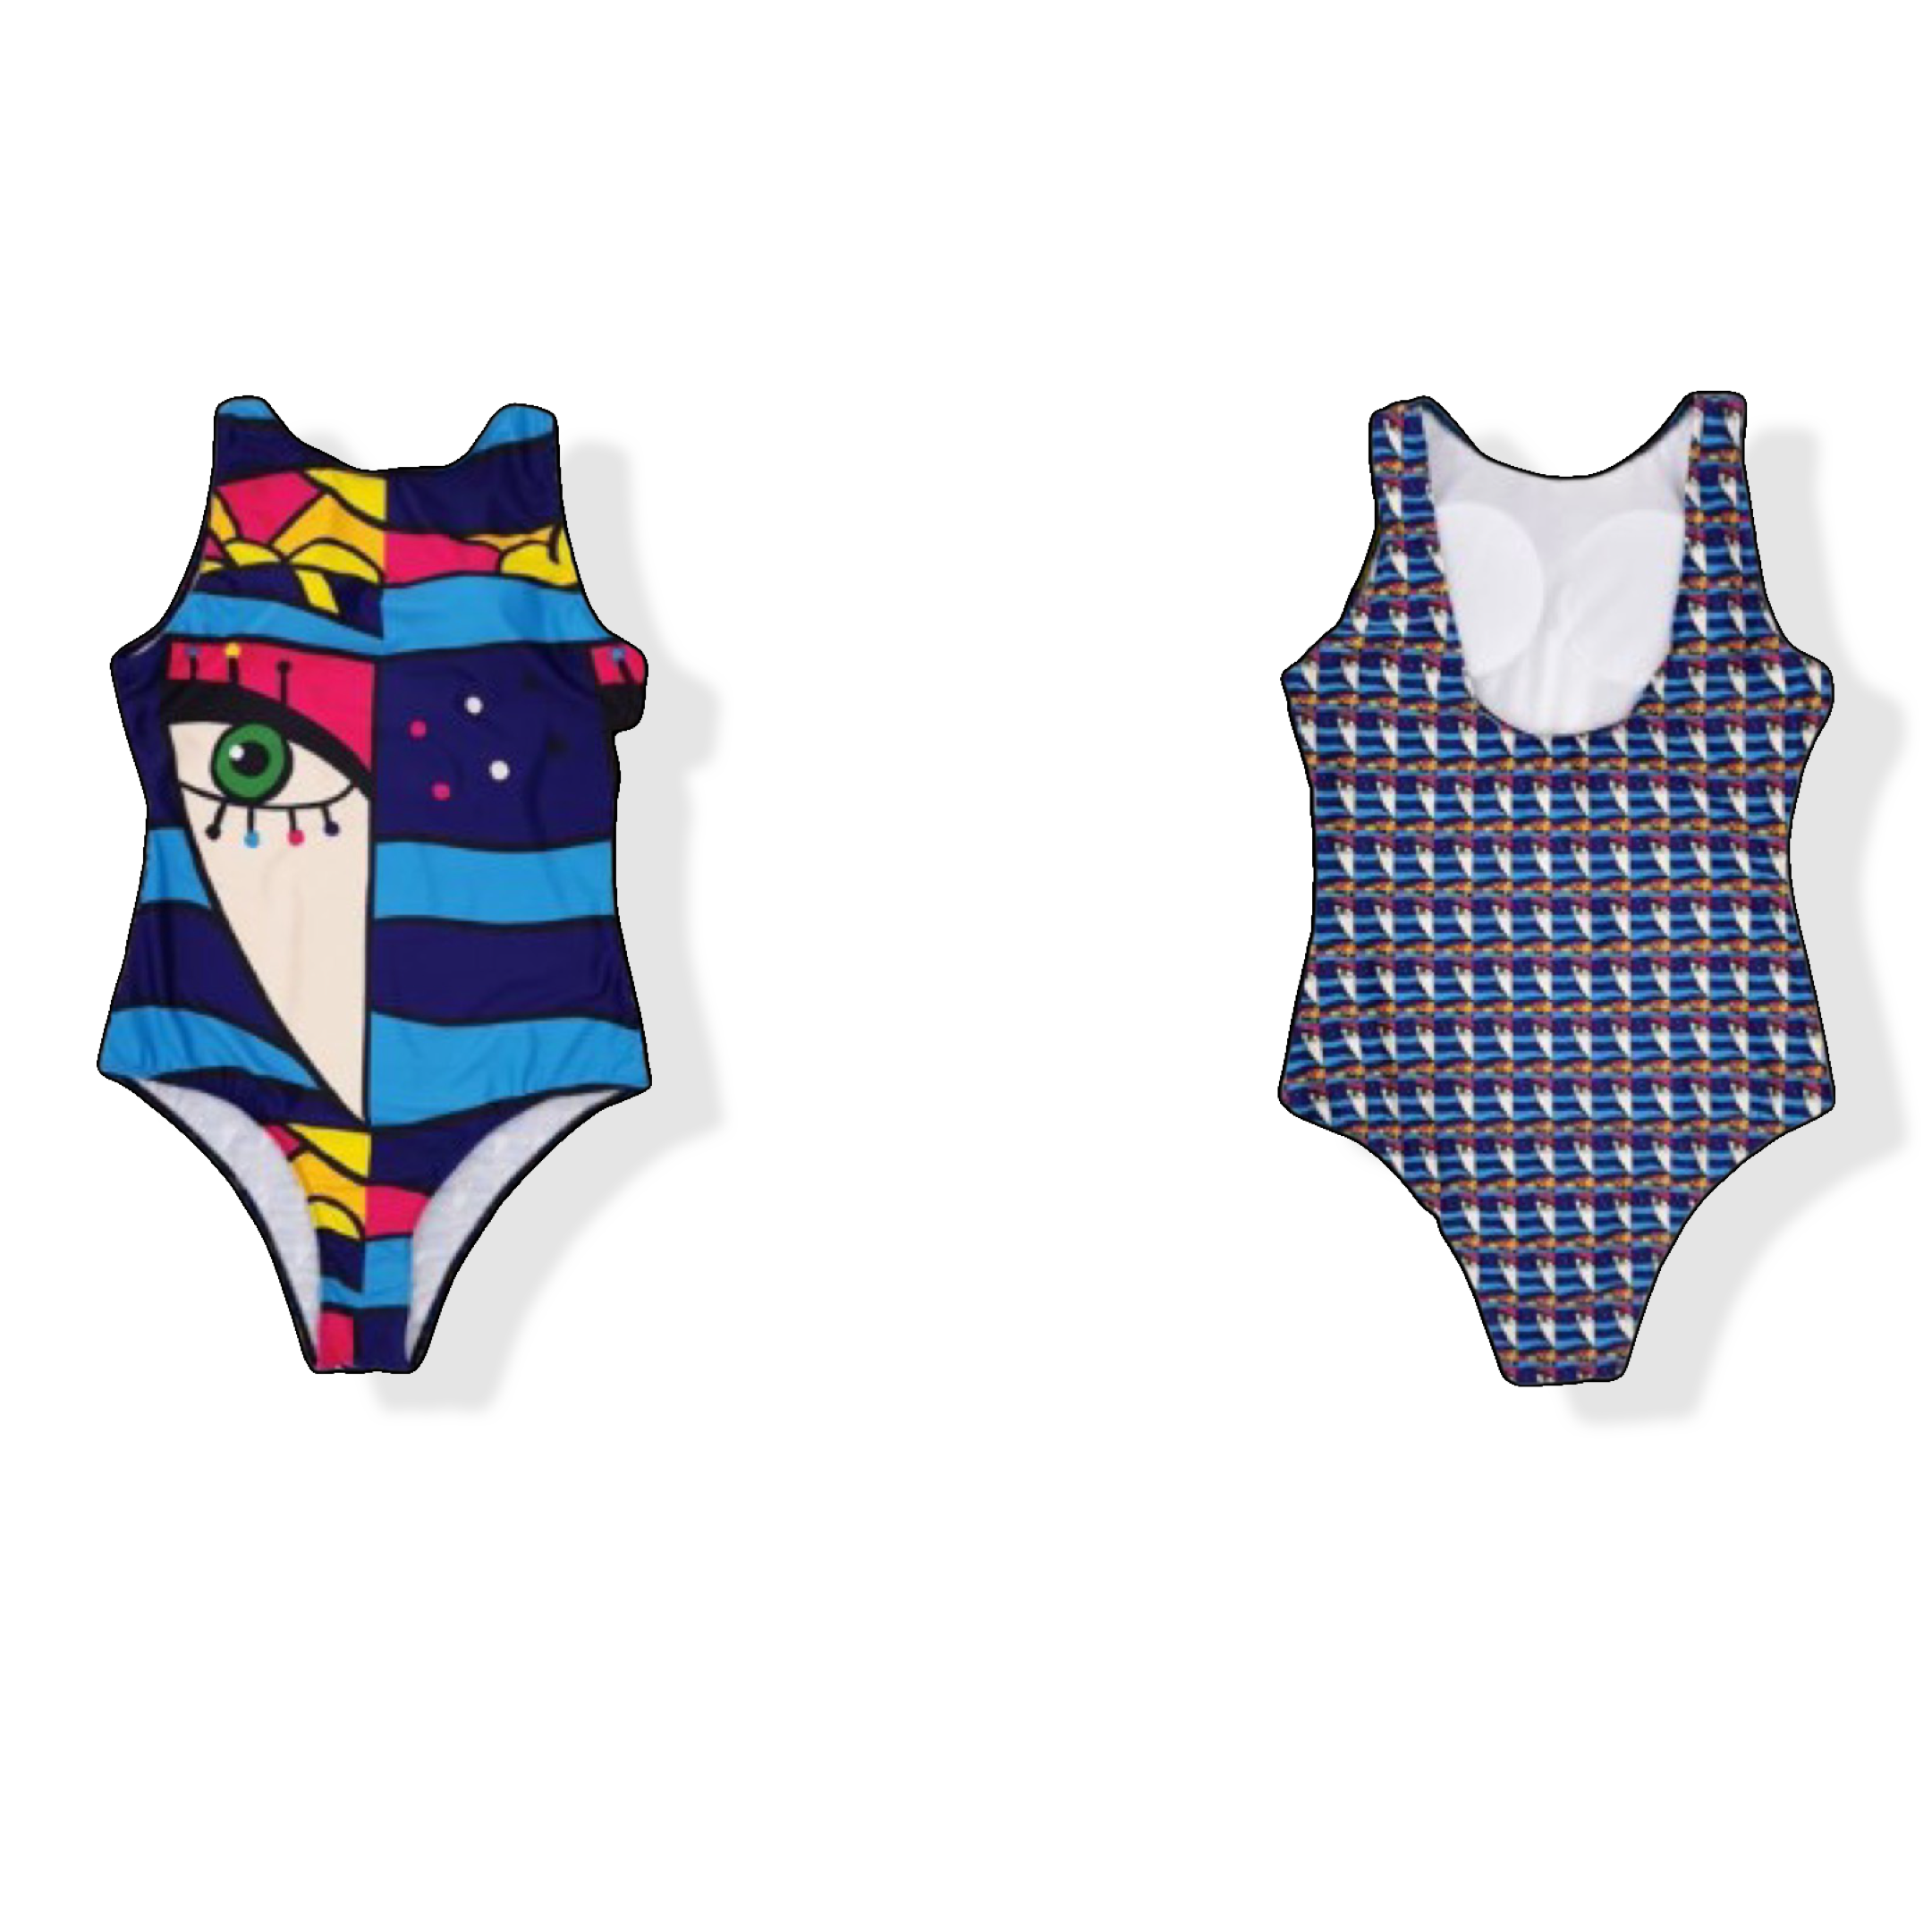 Blue Picasso swimsuit